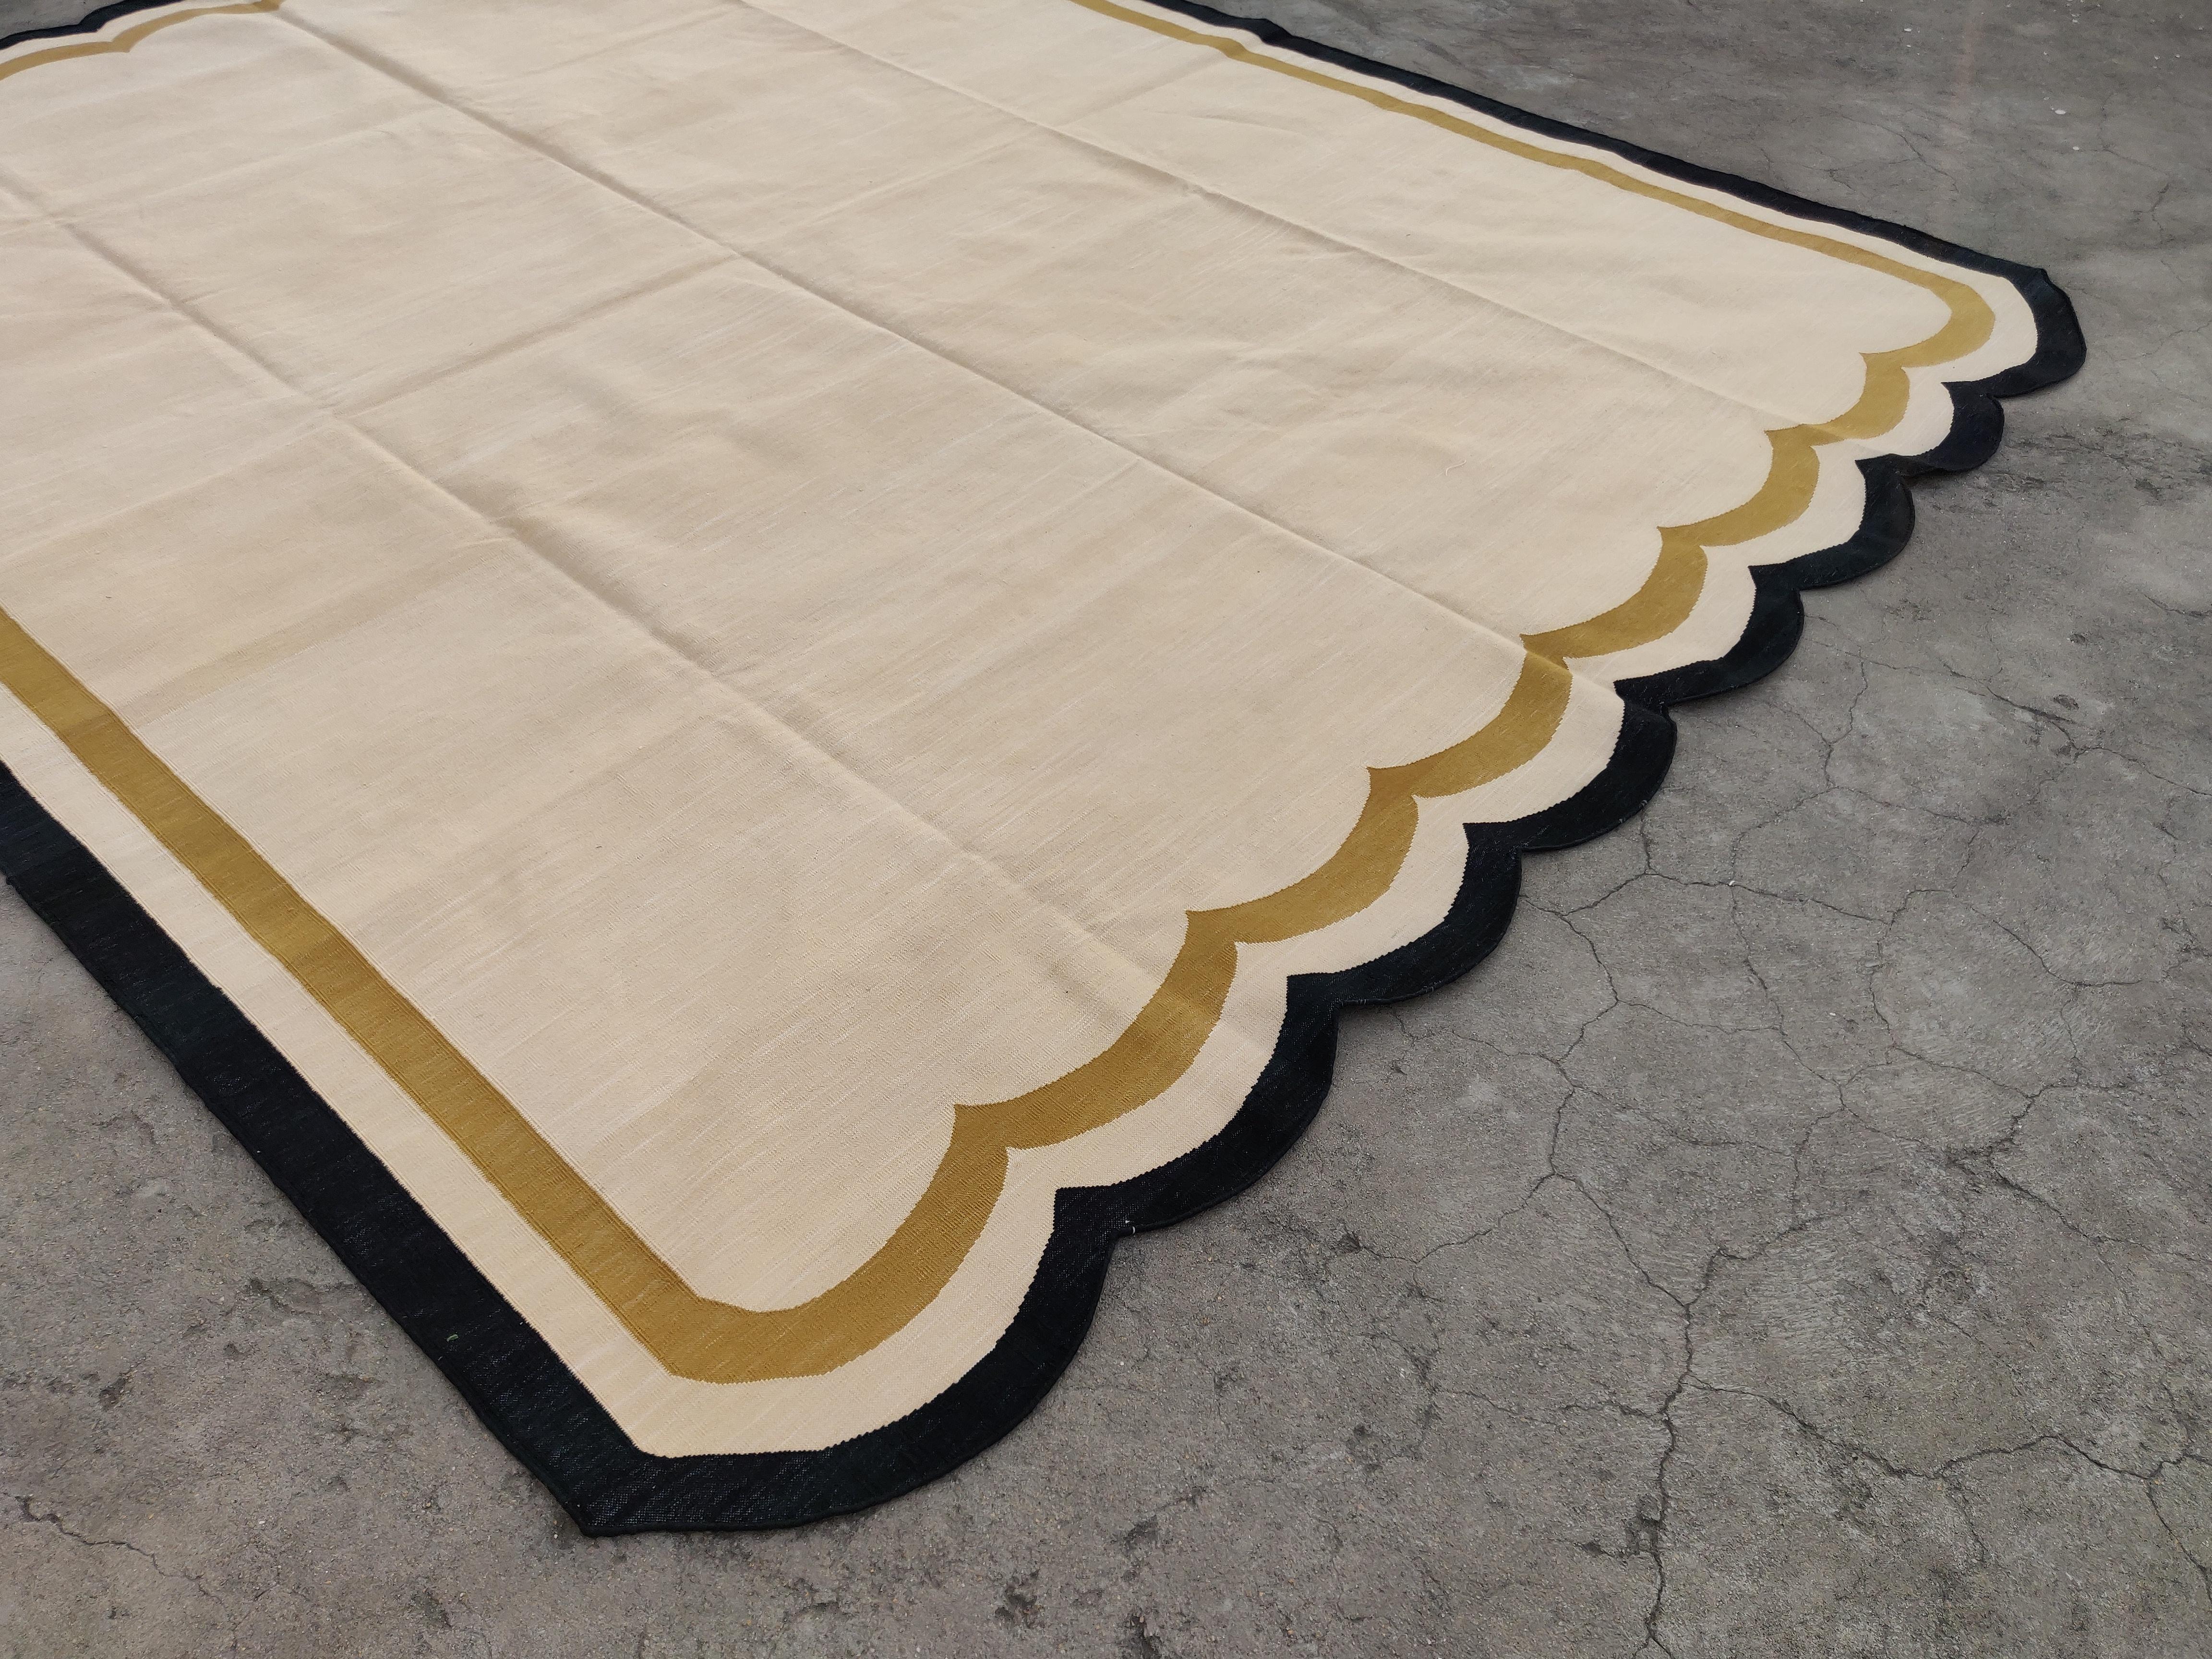 Cotton Vegetable Dyed Beige And Black Scalloped Striped Indian Dhurrie Rug-8'x10' 
These special flat-weave dhurries are hand-woven with 15 ply 100% cotton yarn. Due to the special manufacturing techniques used to create our rugs, the size and color